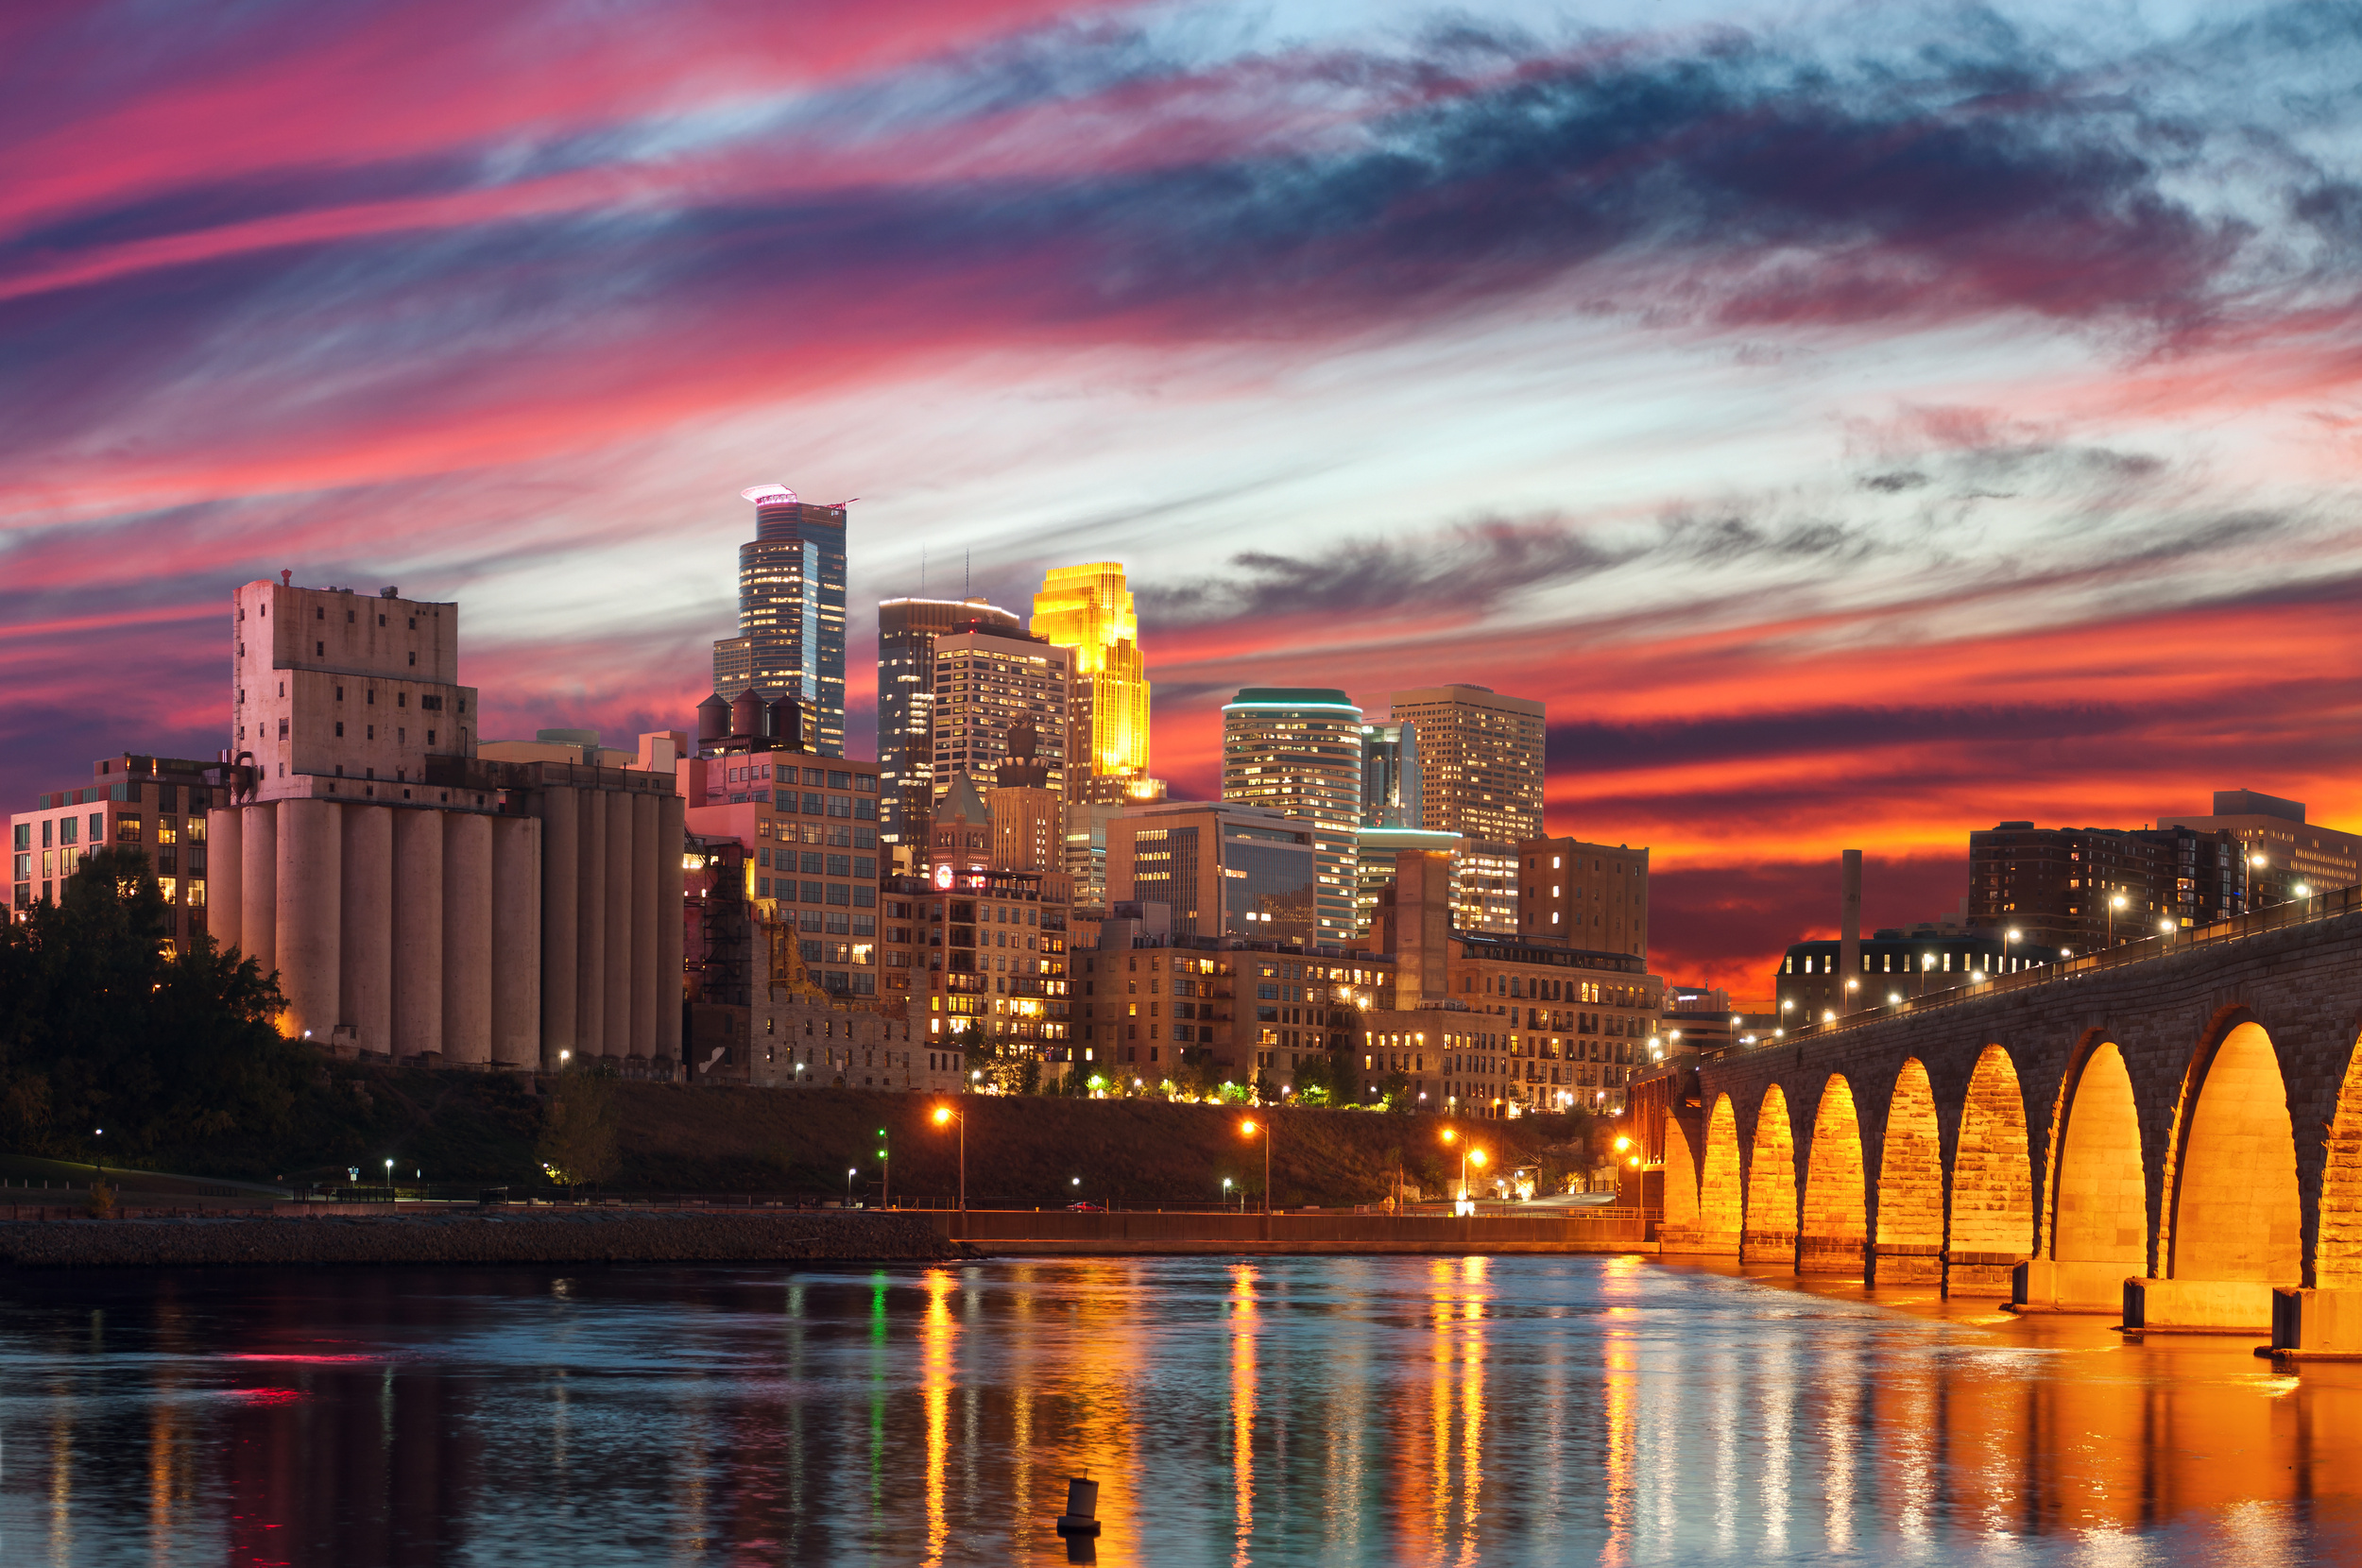 <p>Minneapolis, Minnesota, has an exciting nightlife that is well-known to locals and visitors from surrounding states, but it hasn't gotten the national recognition it deserves. And while Minneapolis has a decidedly city feel, its neighbor St. Paul has a vintage vibe for an entirely different experience. </p><p>You may also like: <a href='https://www.yardbarker.com/lifestyle/articles/these_20_vegetables_are_best_eaten_in_spring/s1__40253251'>These 20 vegetables are best eaten in spring</a></p>